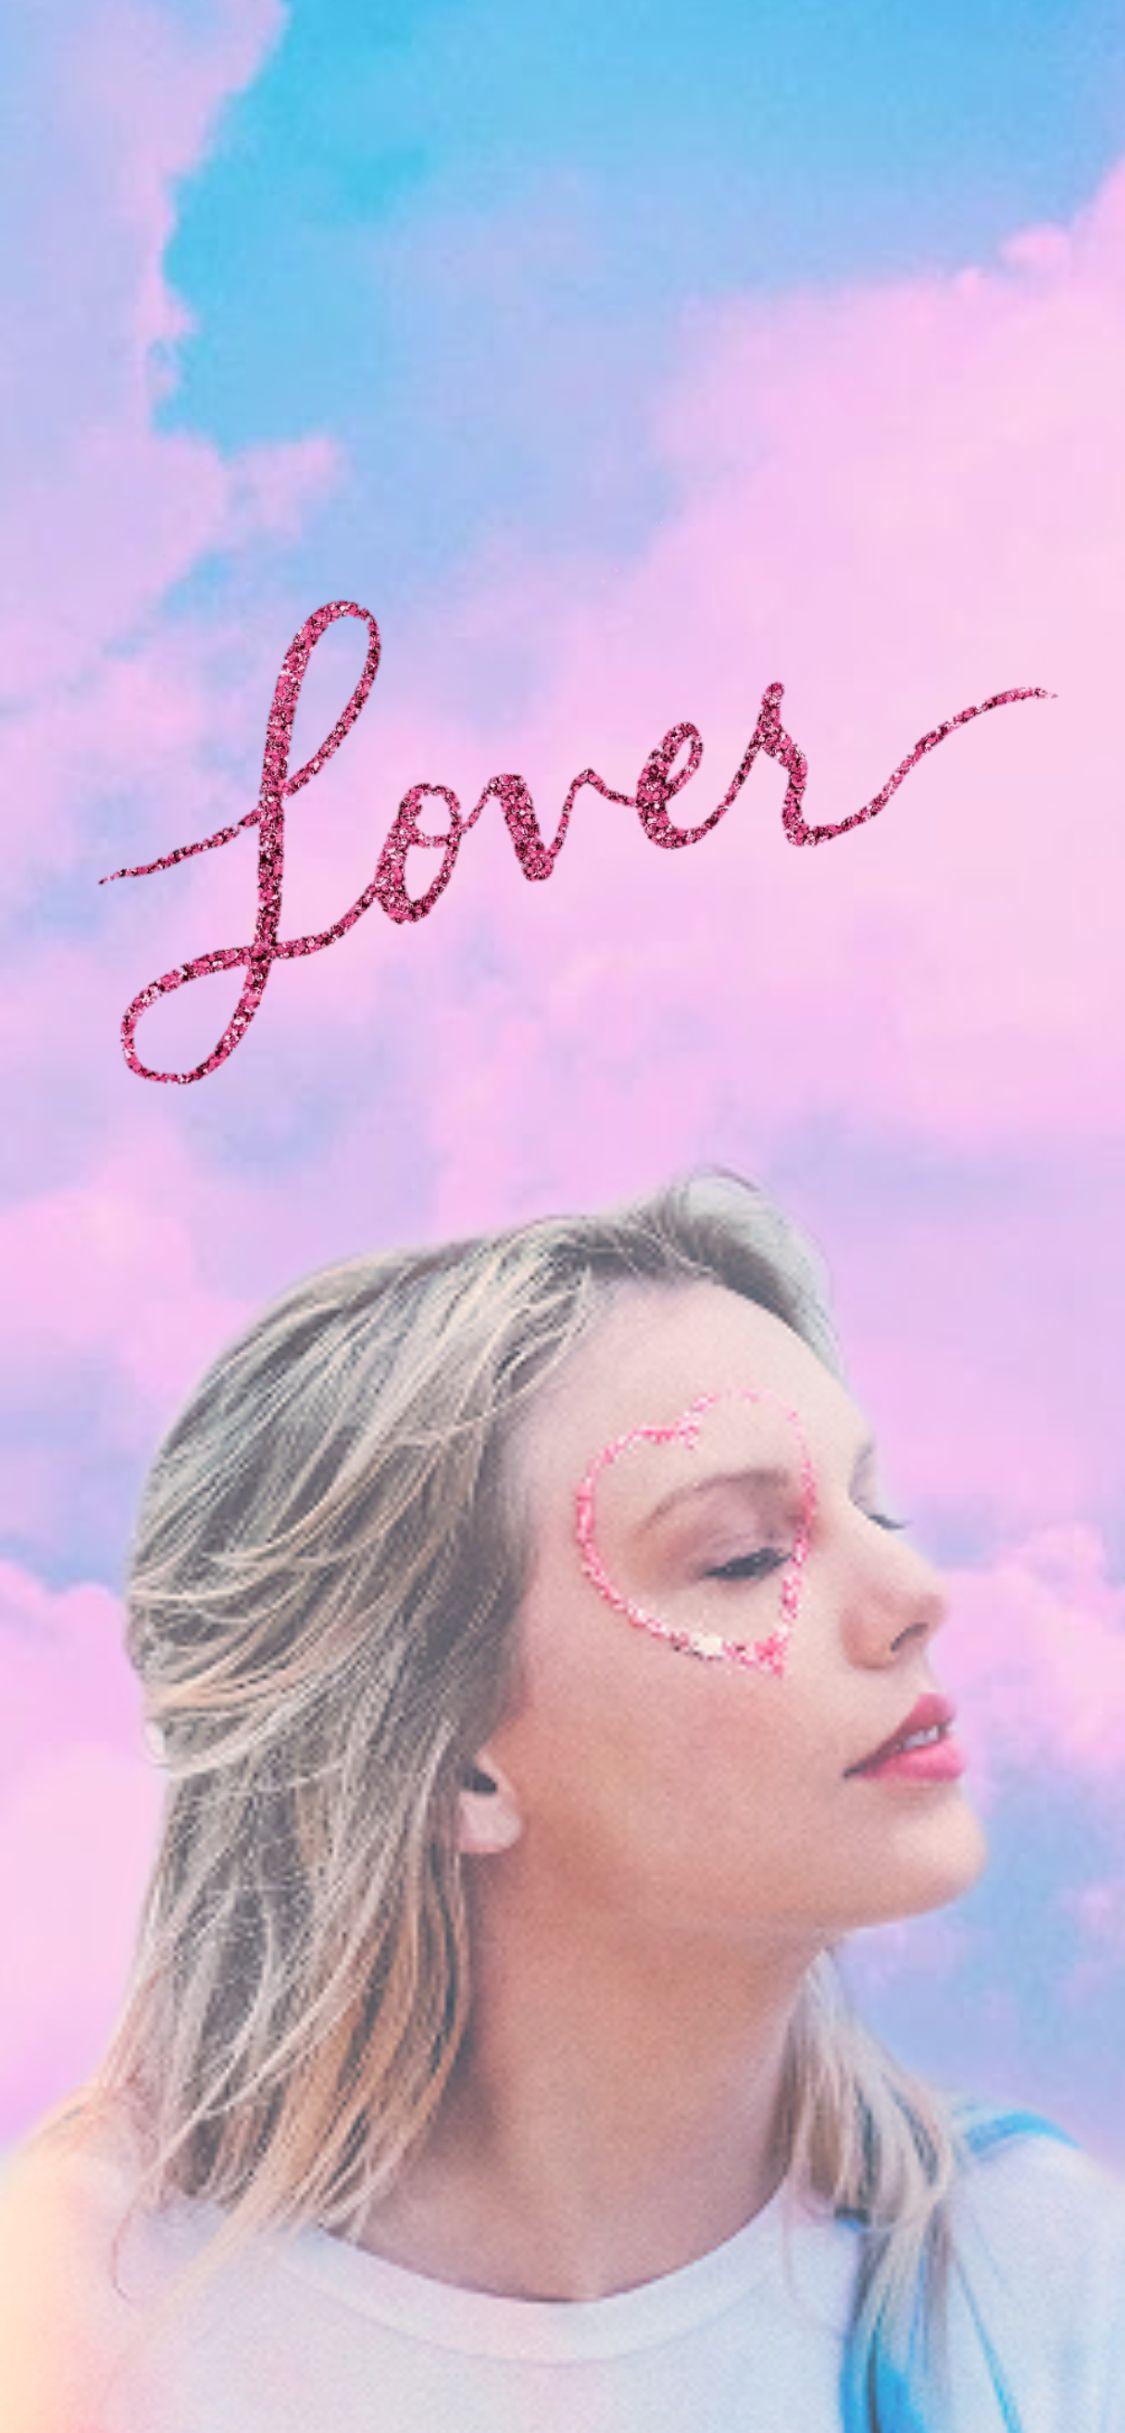 Taylor Swift Lover Wallpapers Top Free Taylor Swift Lover Backgrounds